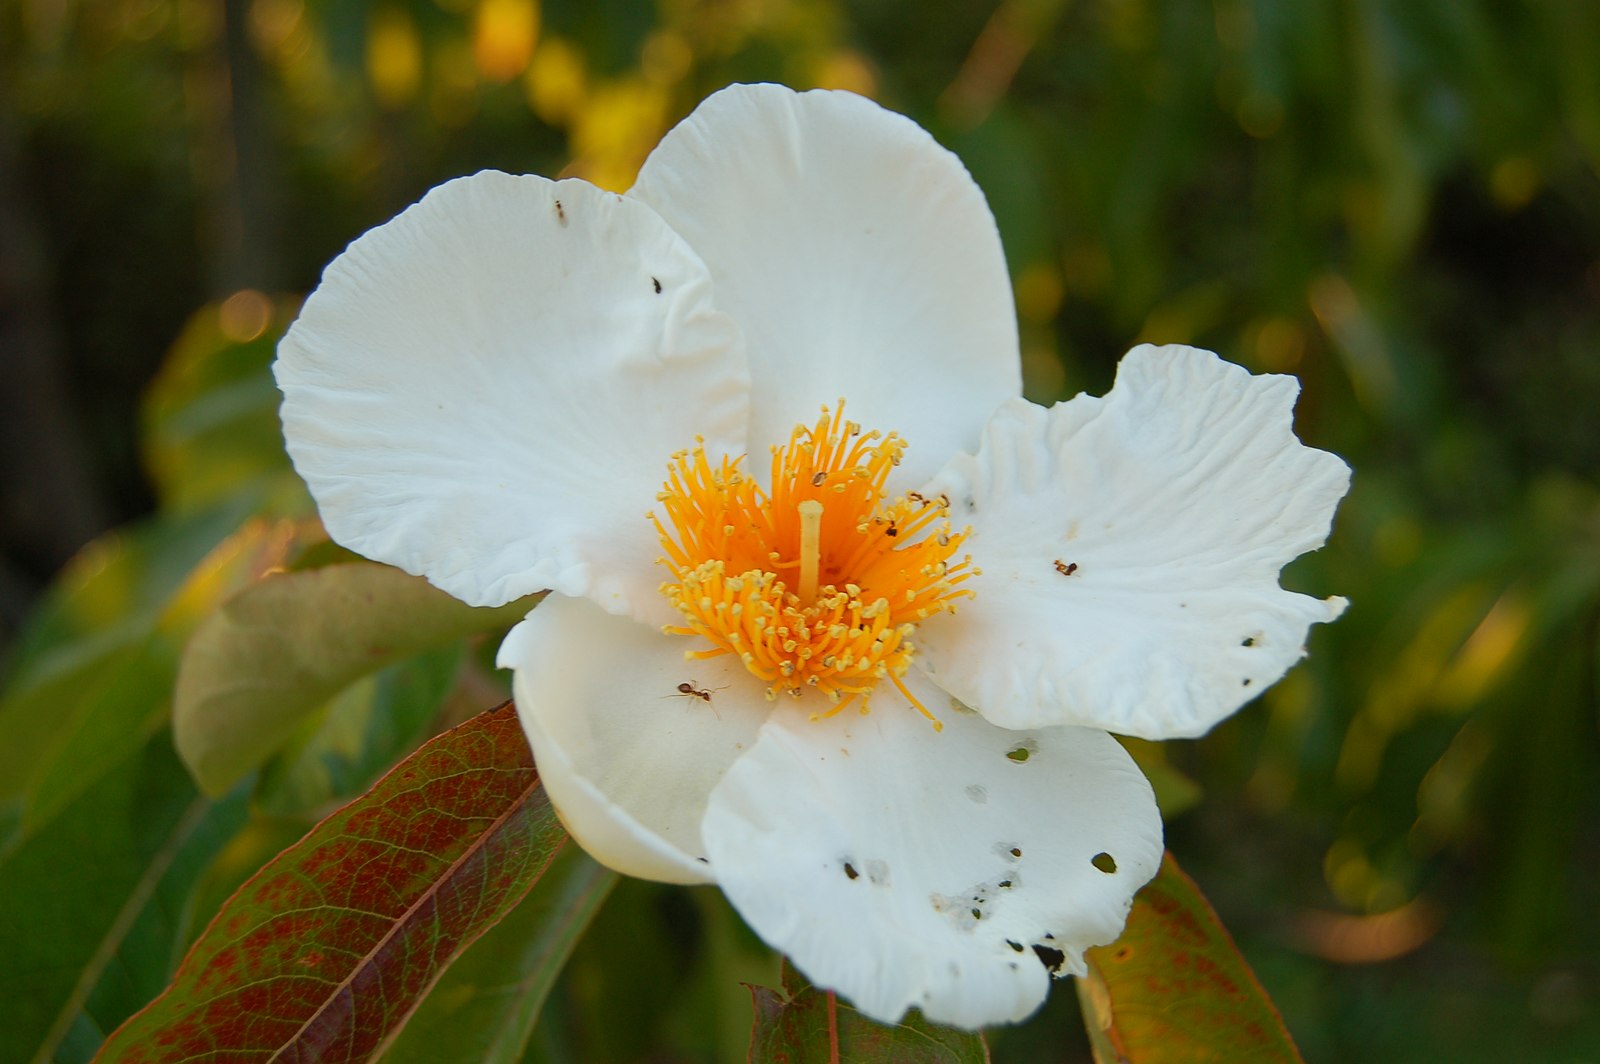 Photo of Franklinia Alatamaha in bloom from Wikipedia